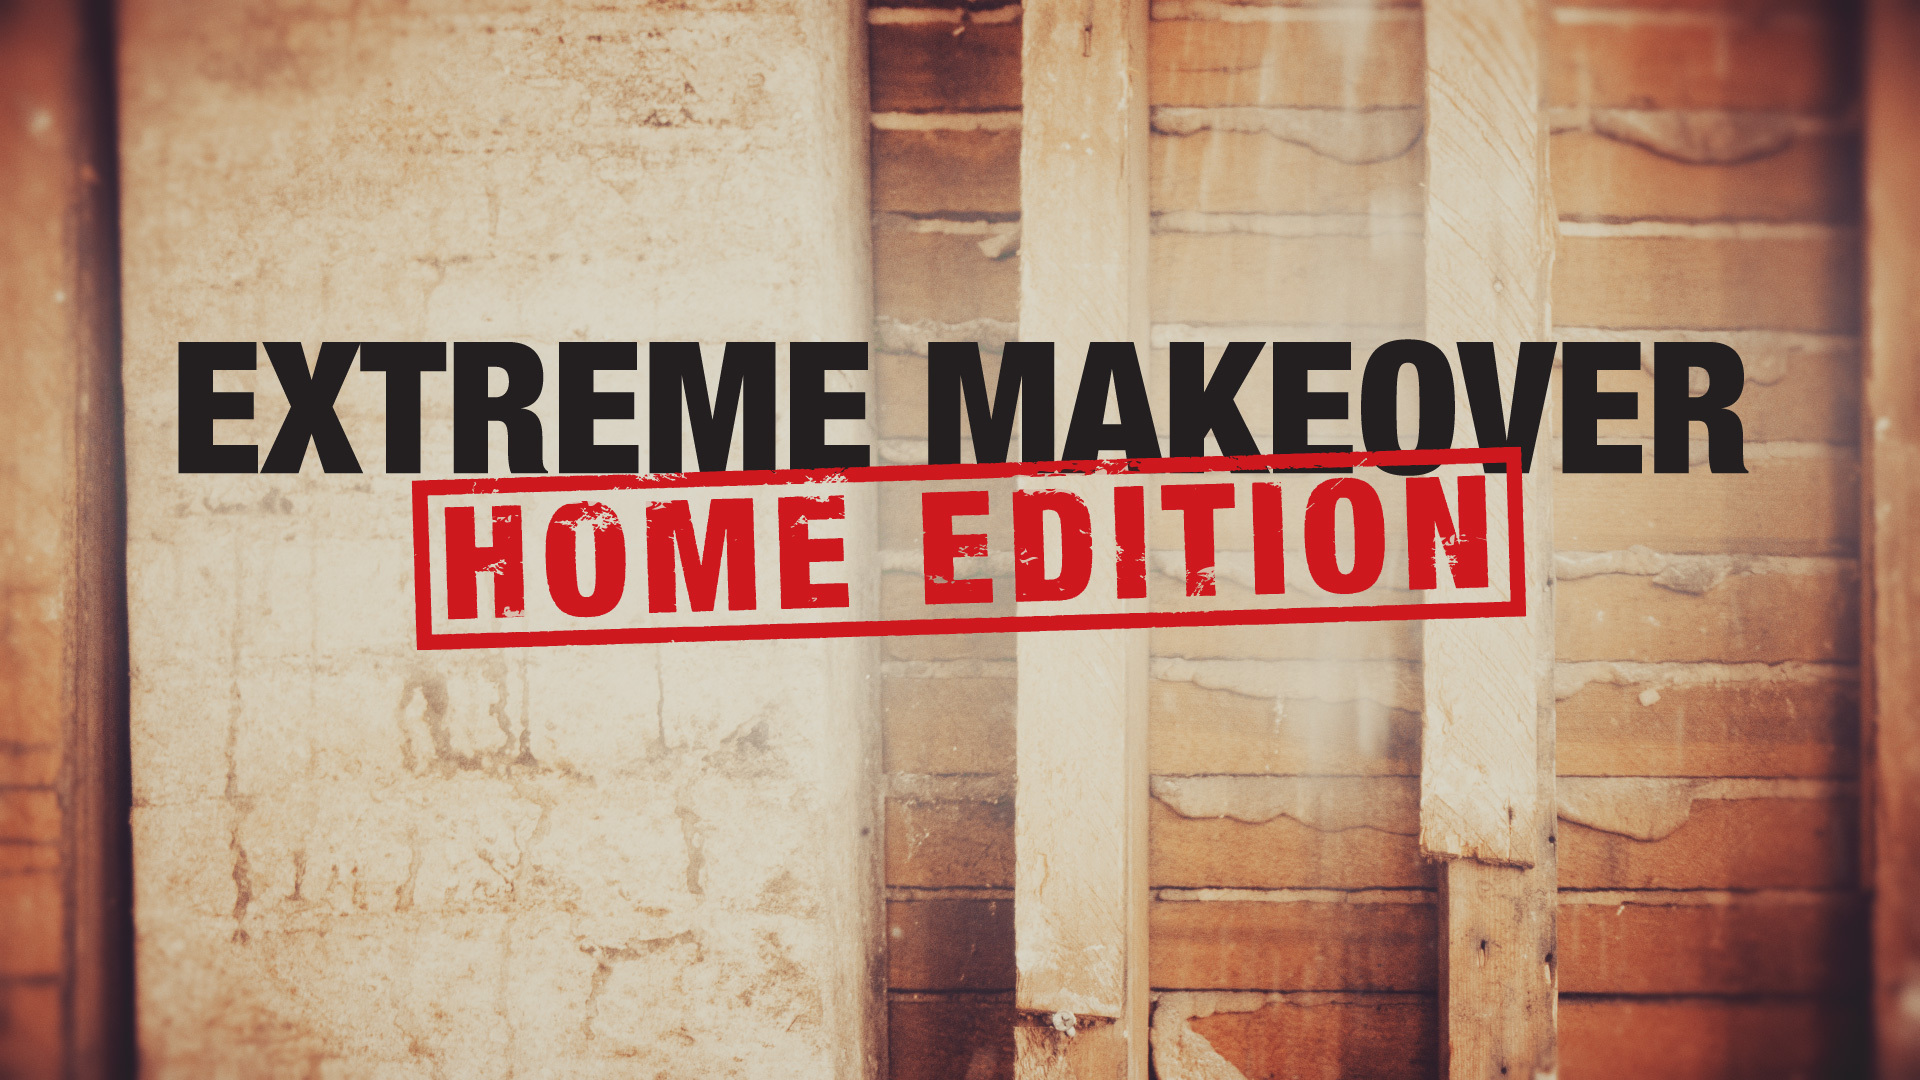 ‘Extreme Makeover: Home Edition’ Coming to HGTV with 10 New Episodes